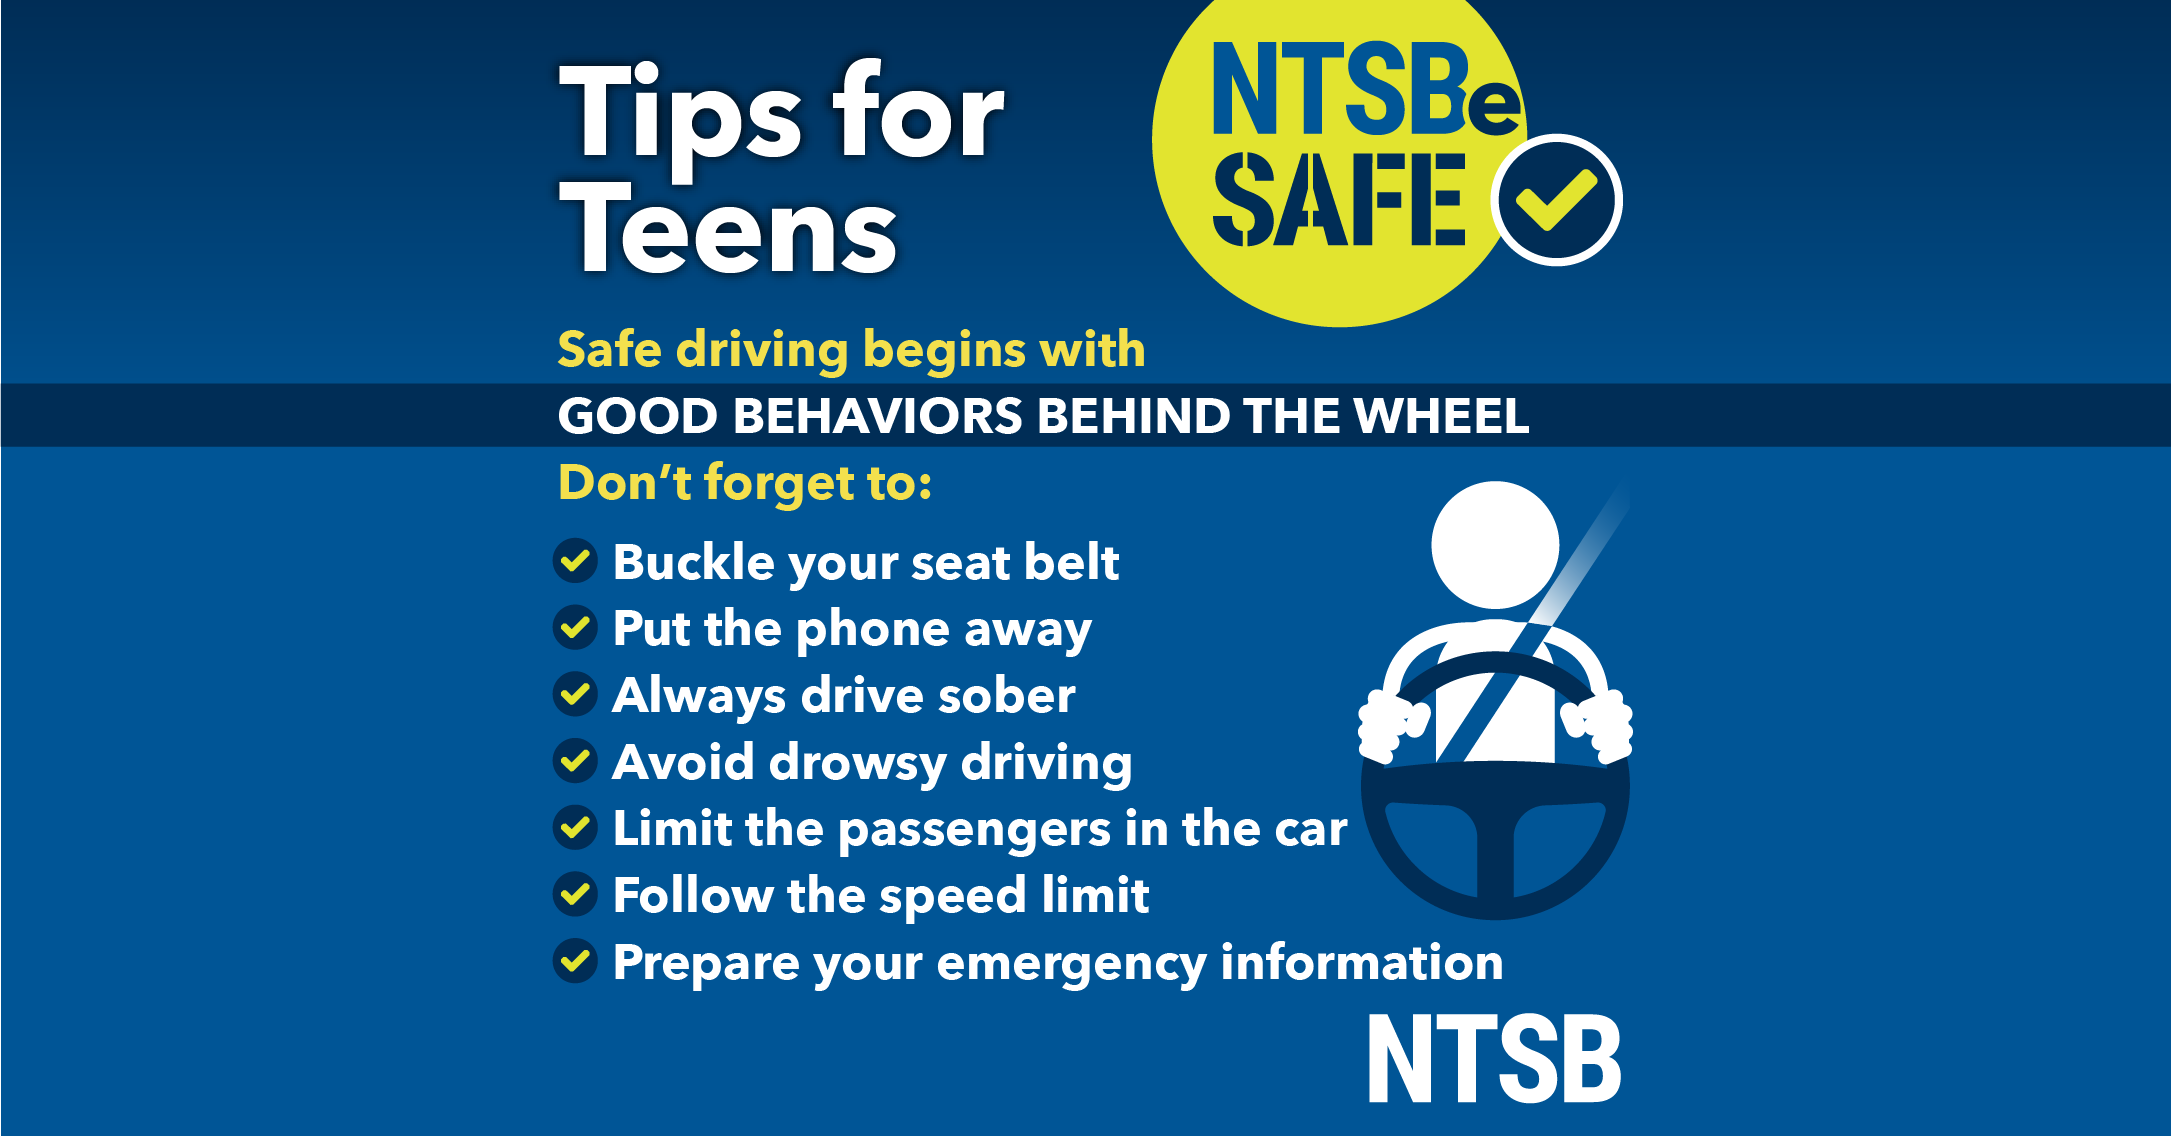 Teen and Young Driver Safety Tip Card graphic.